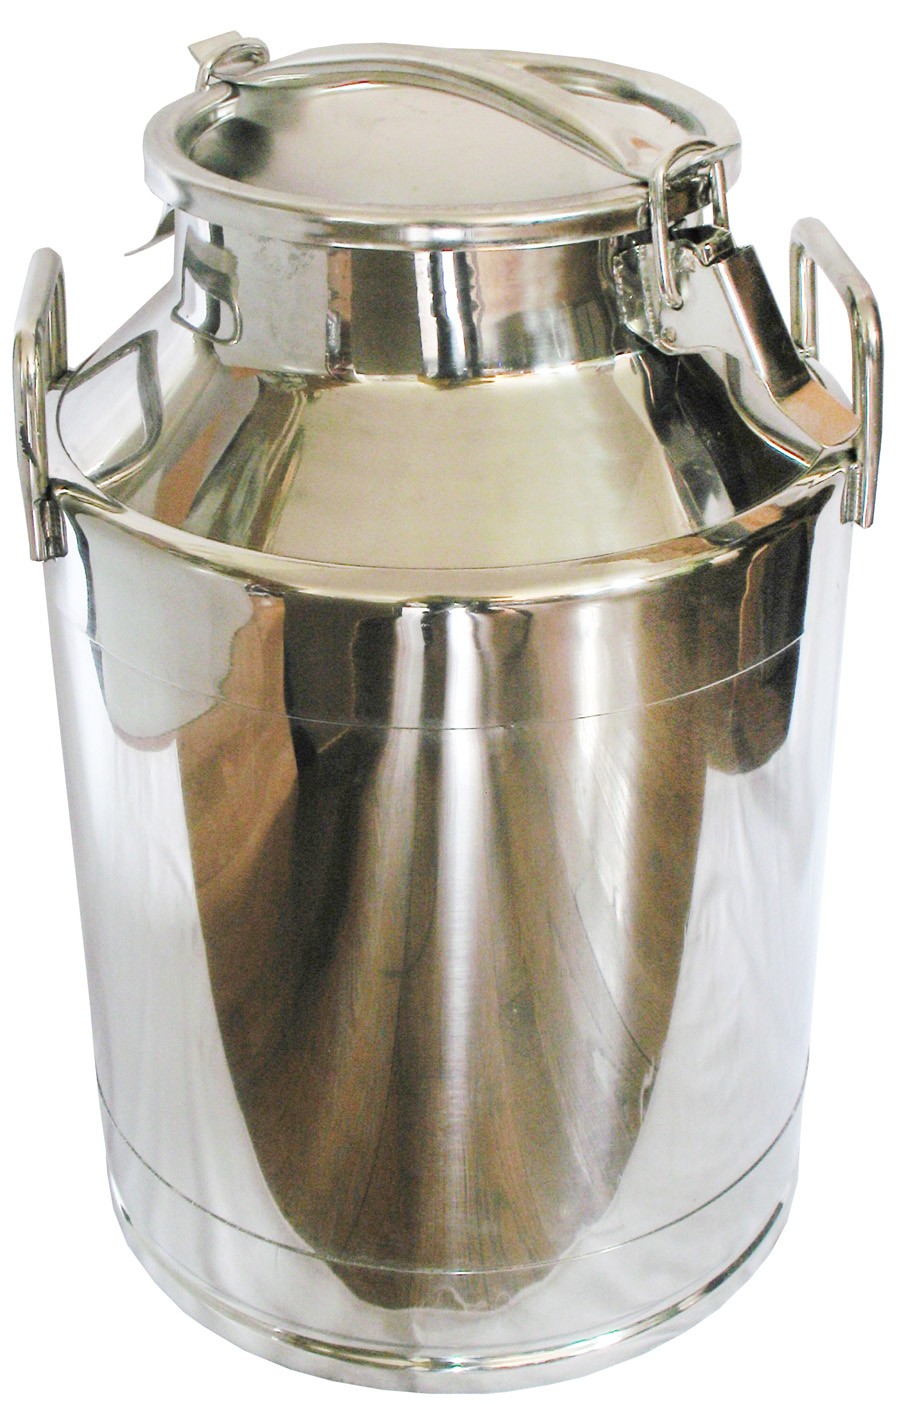 Stainless Steel Milk Transport Can with Cover - 90 lbs